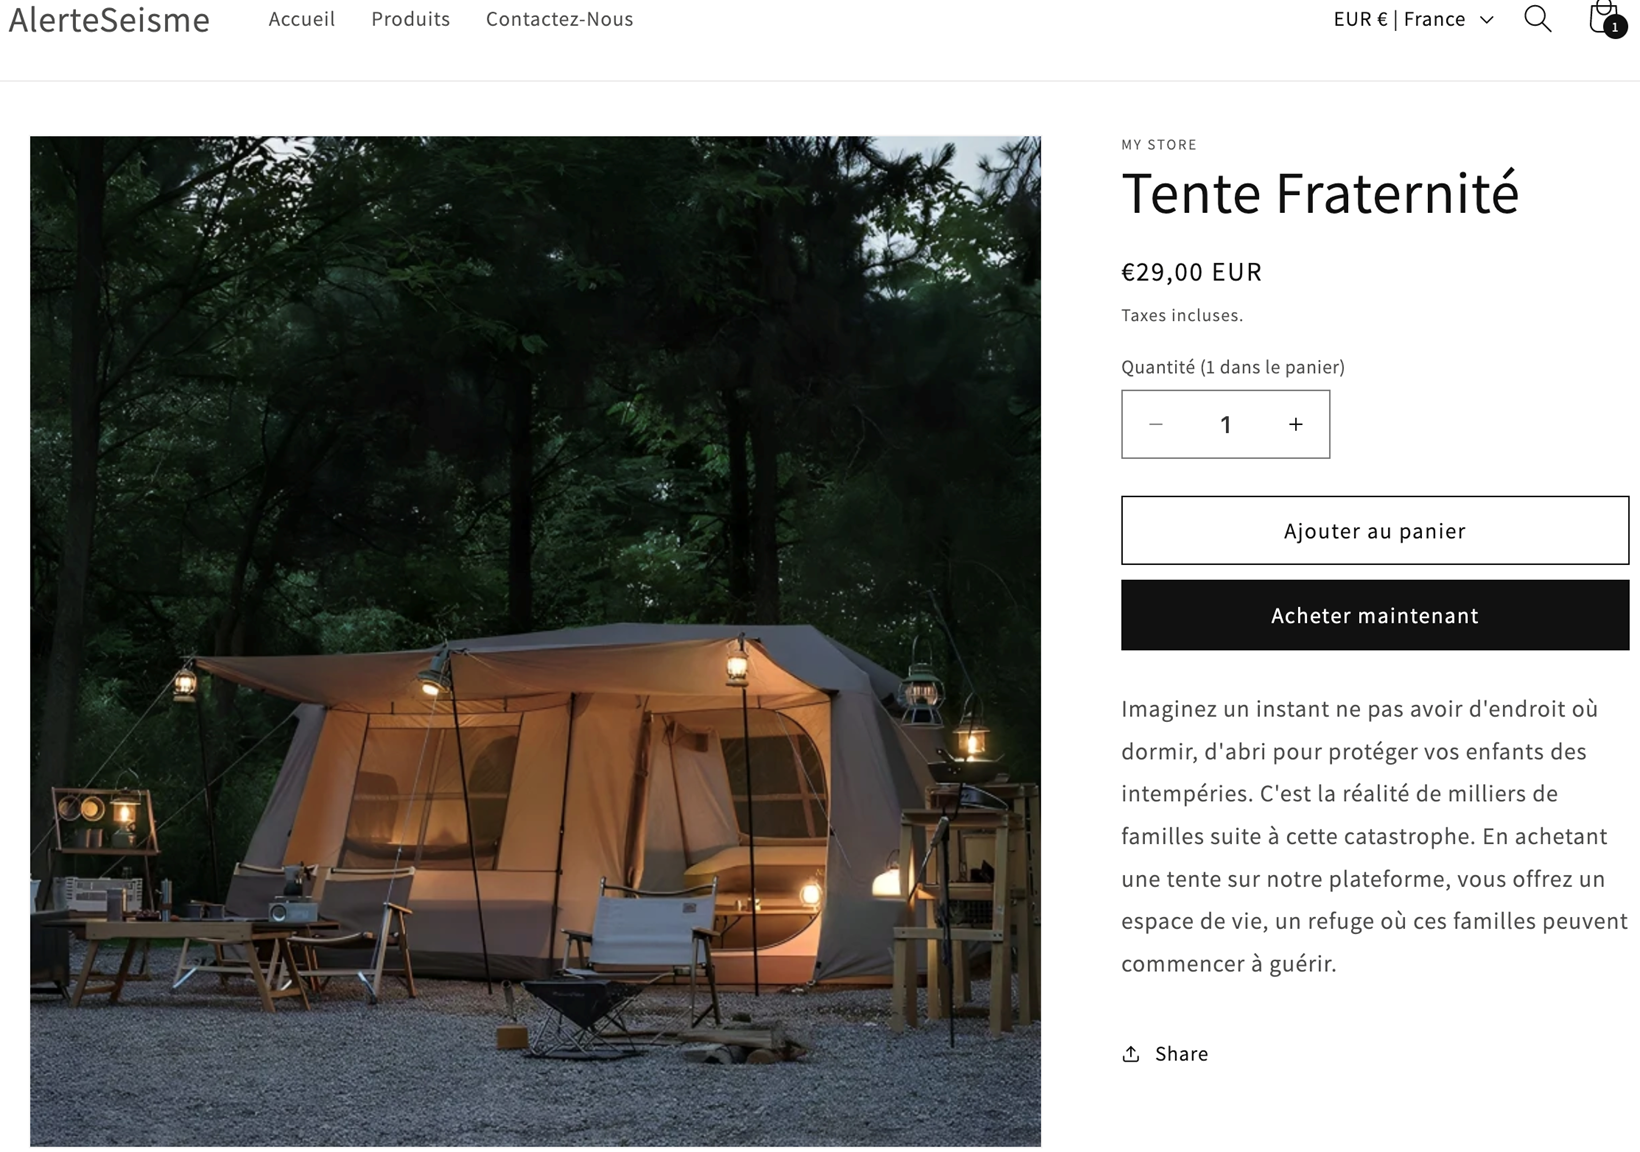 Figure 2. The so-called fraternity tent is being sold for €29 on the spurious website.